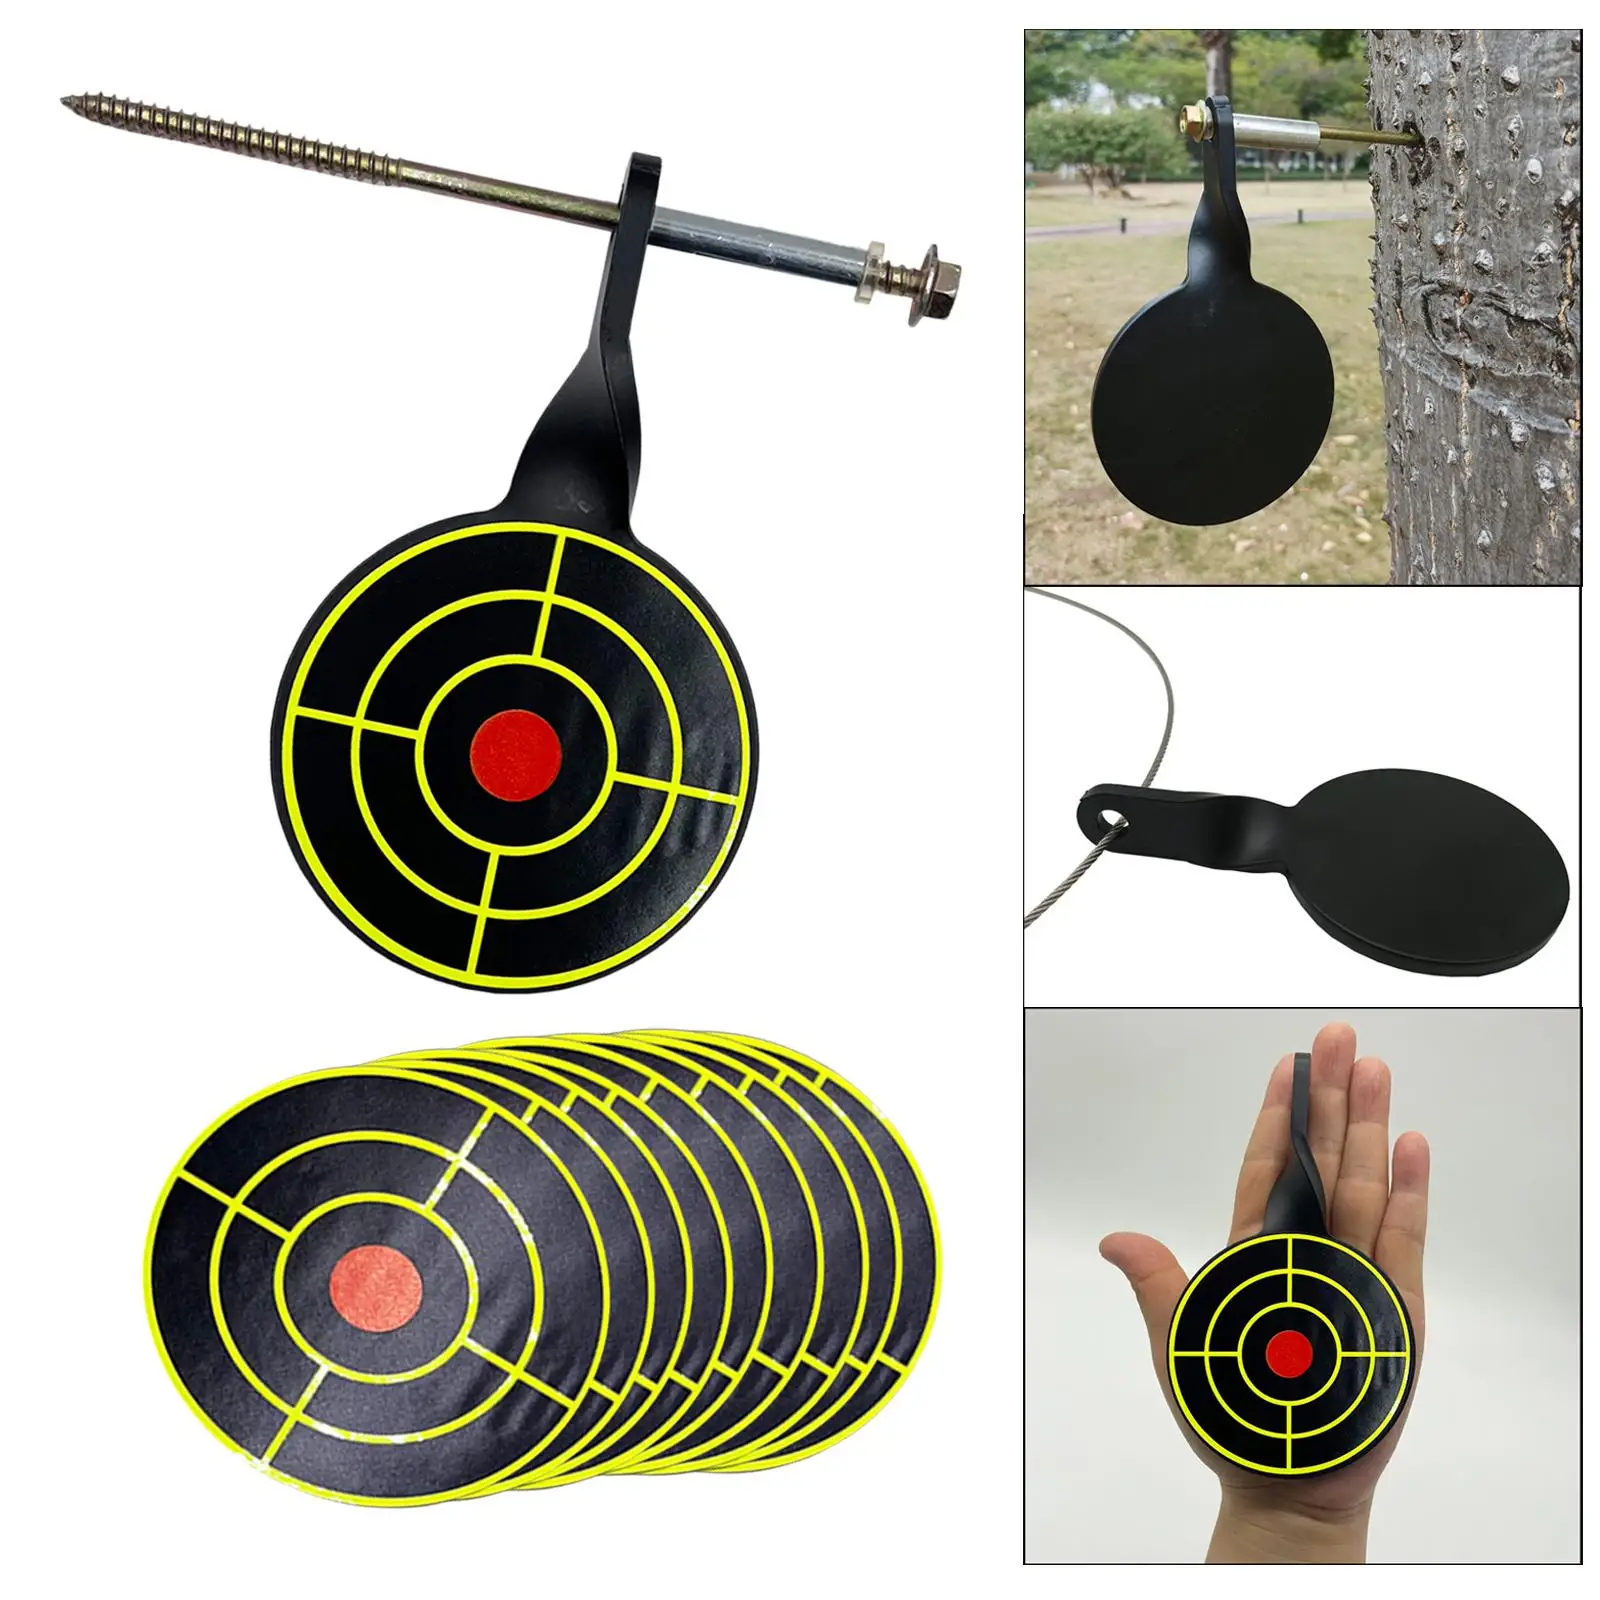 Metal Practice Target Portable Reset Target Rotary Screwed Type for Hunting